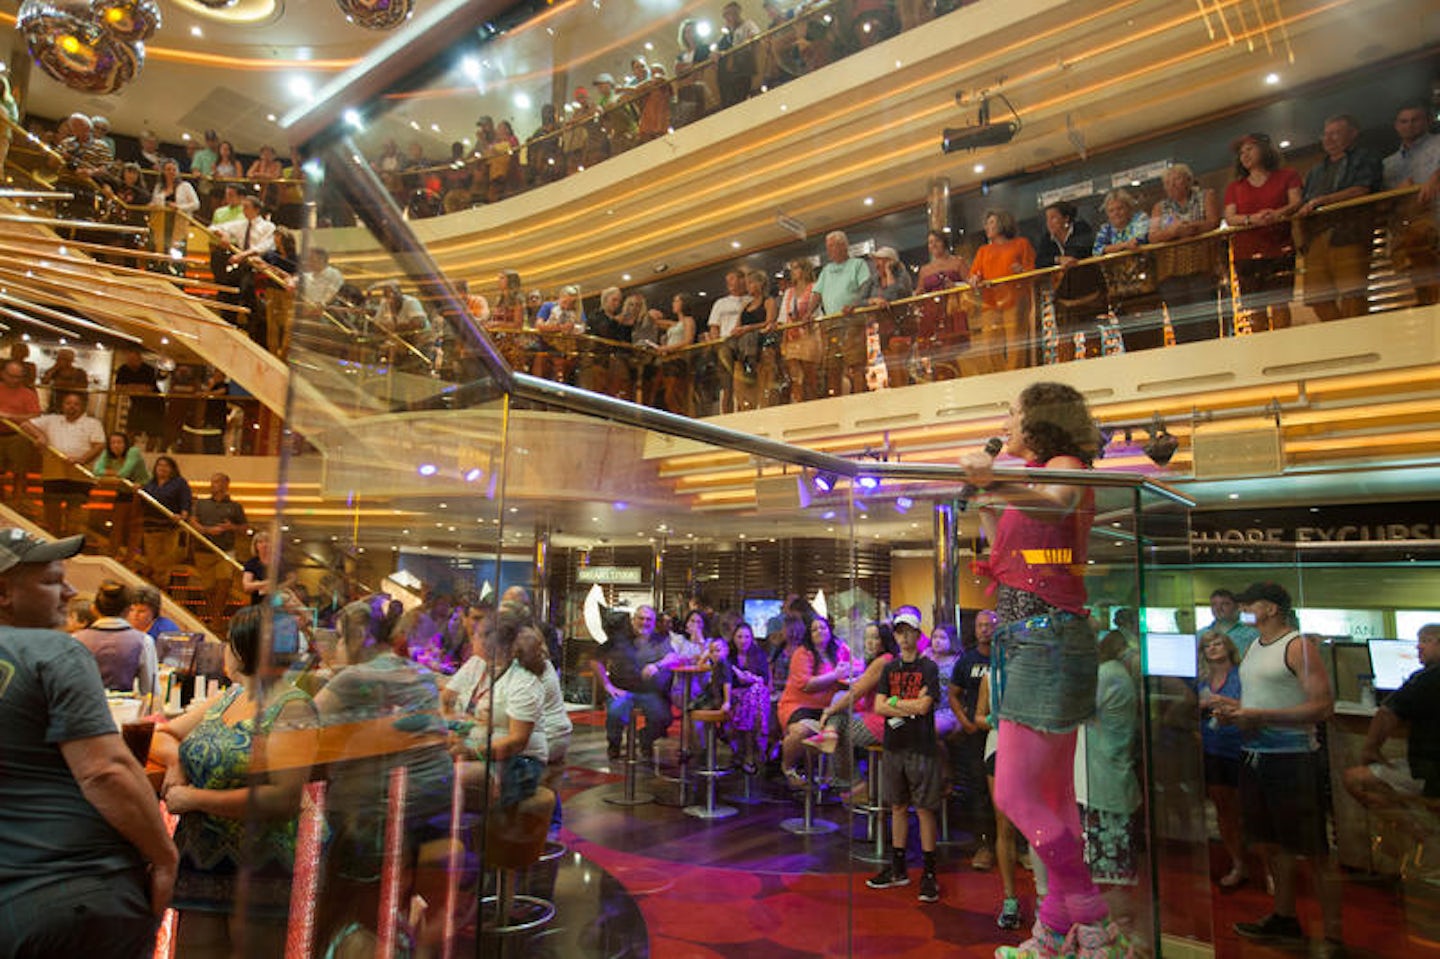 The 80s Party on Carnival Sunshine